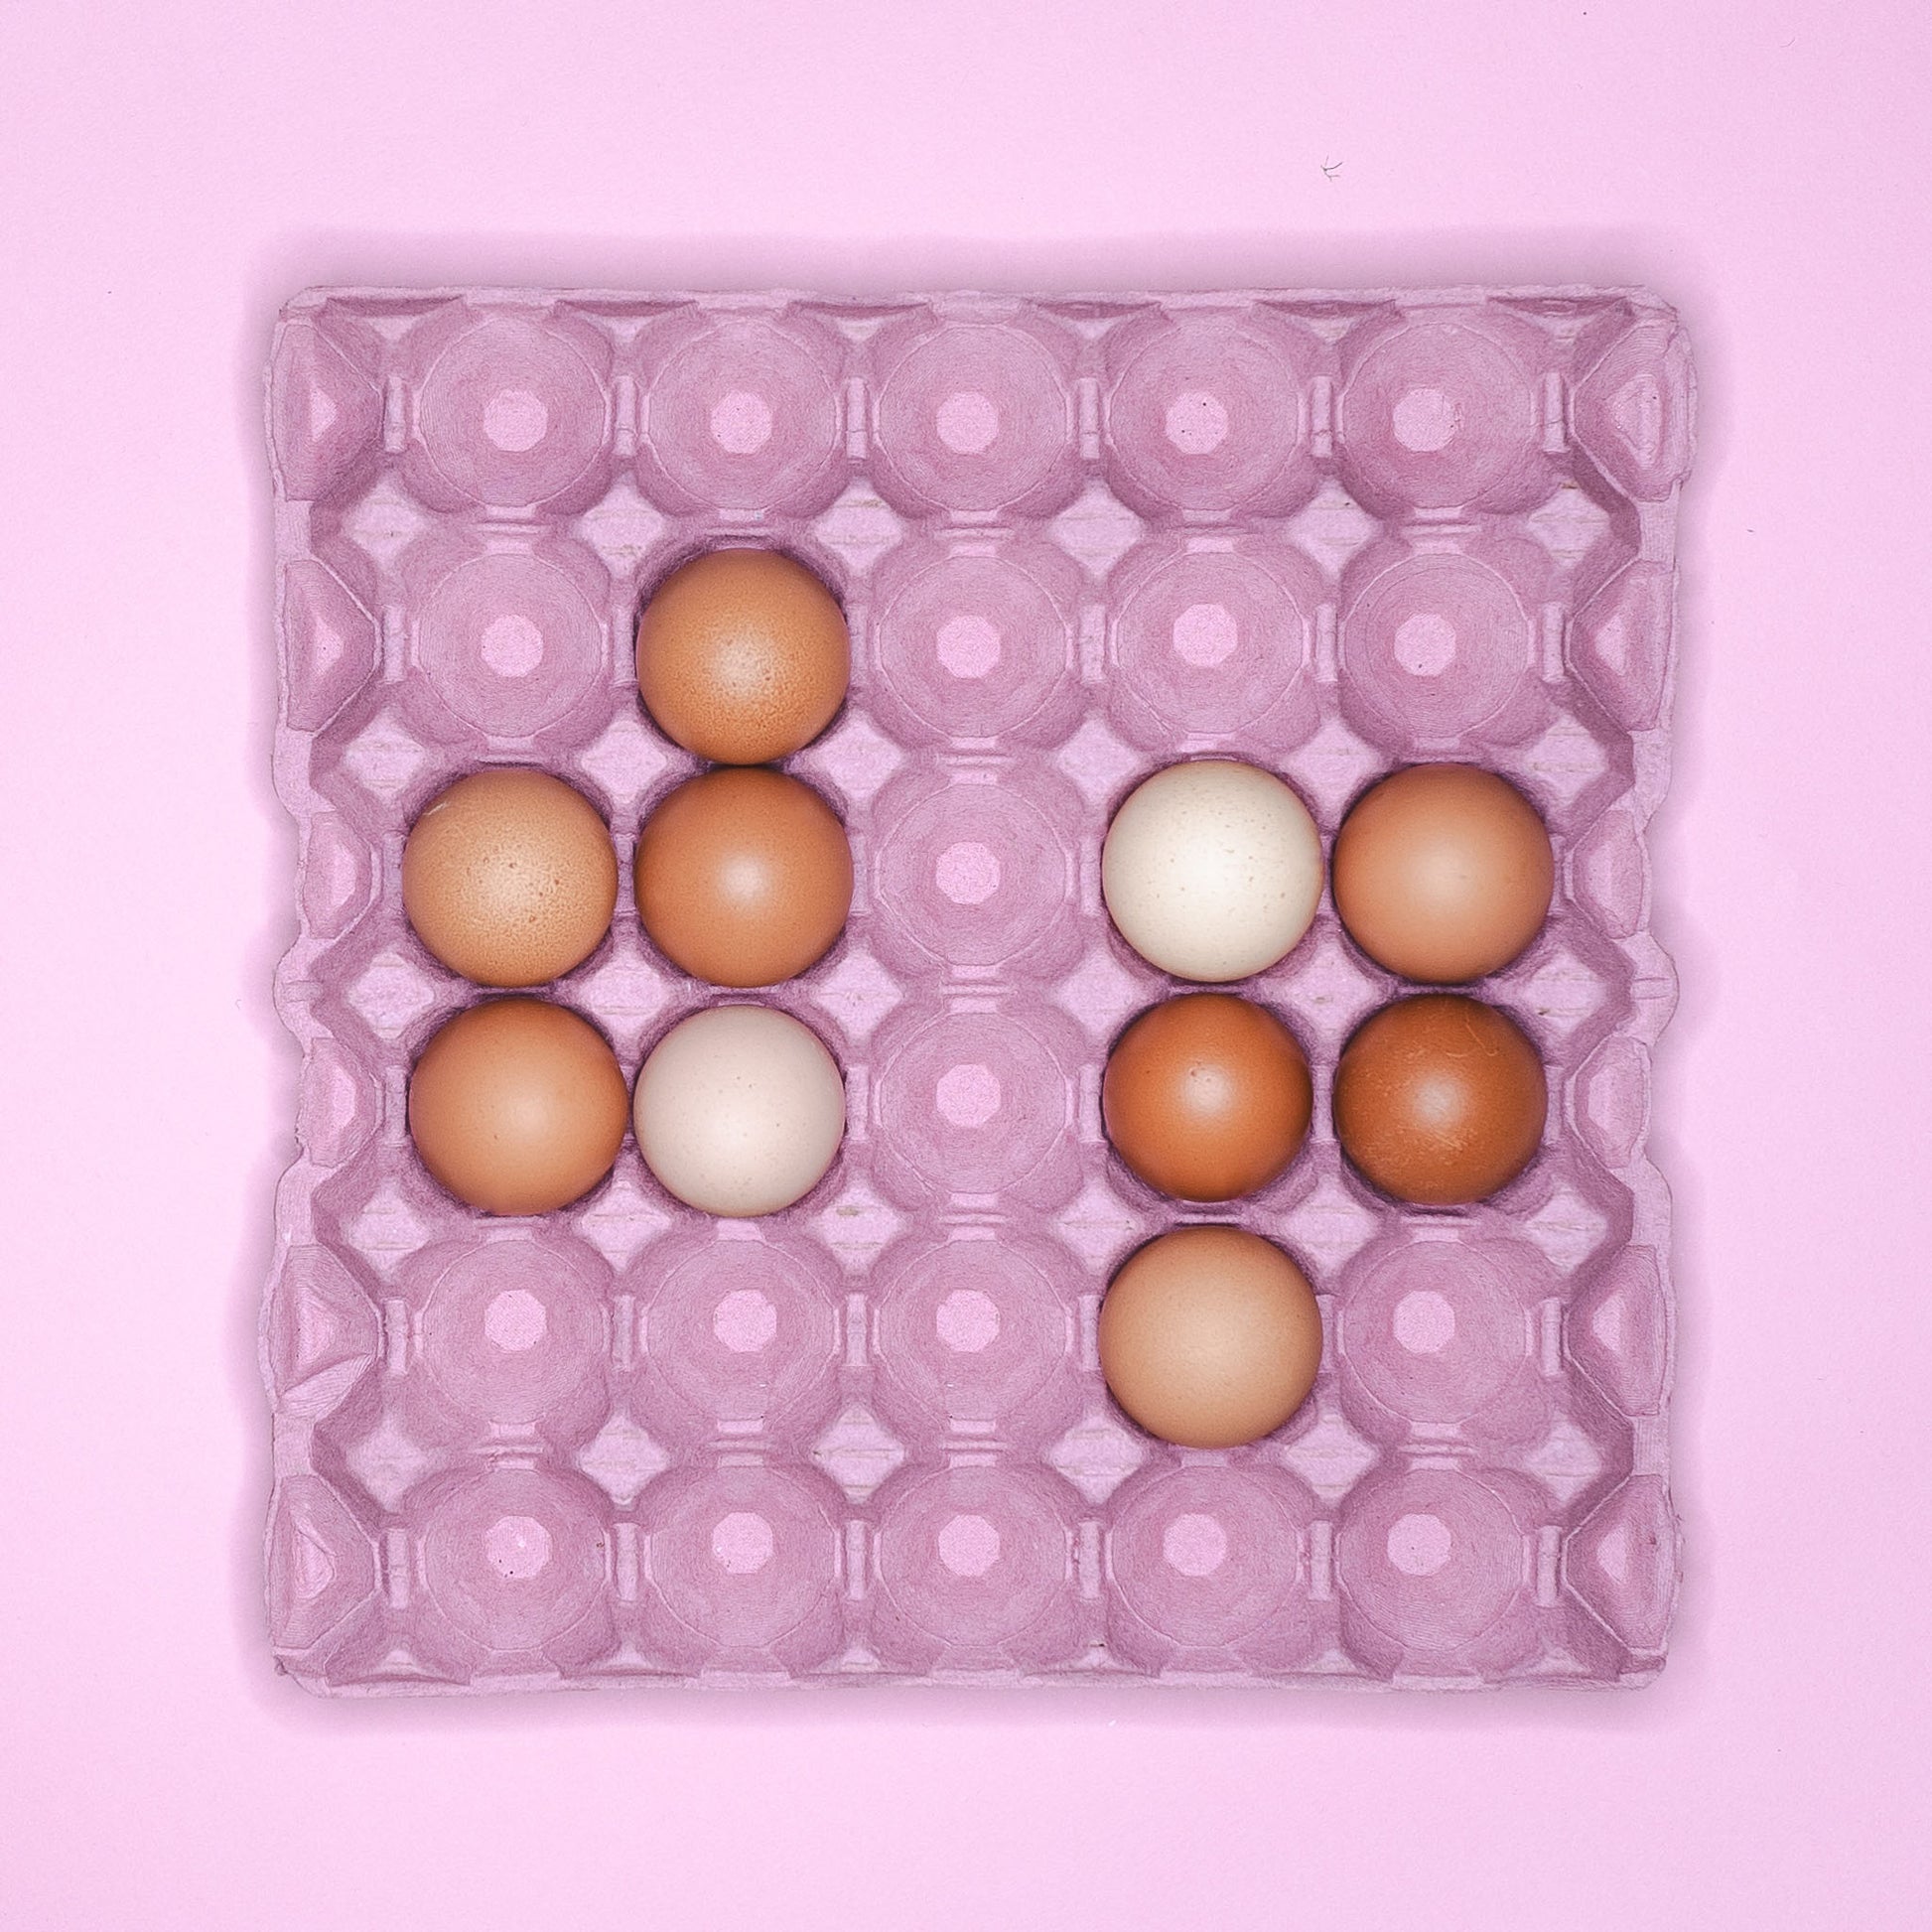 A pink cardboard tray holding 10 eggs